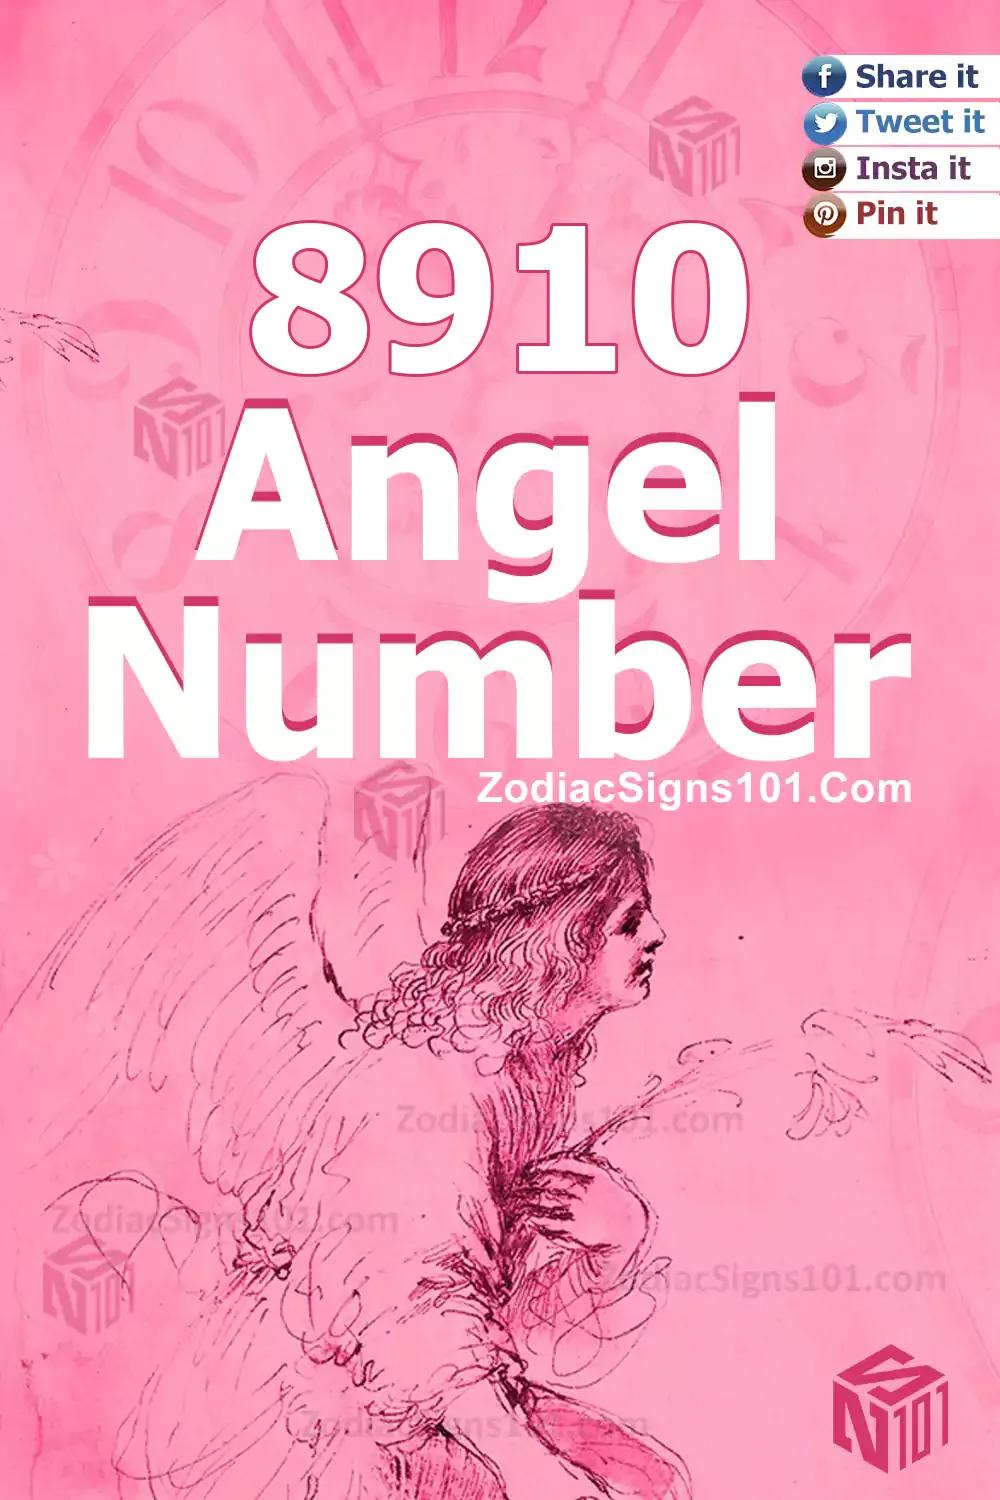 8910 Angel Number Meaning